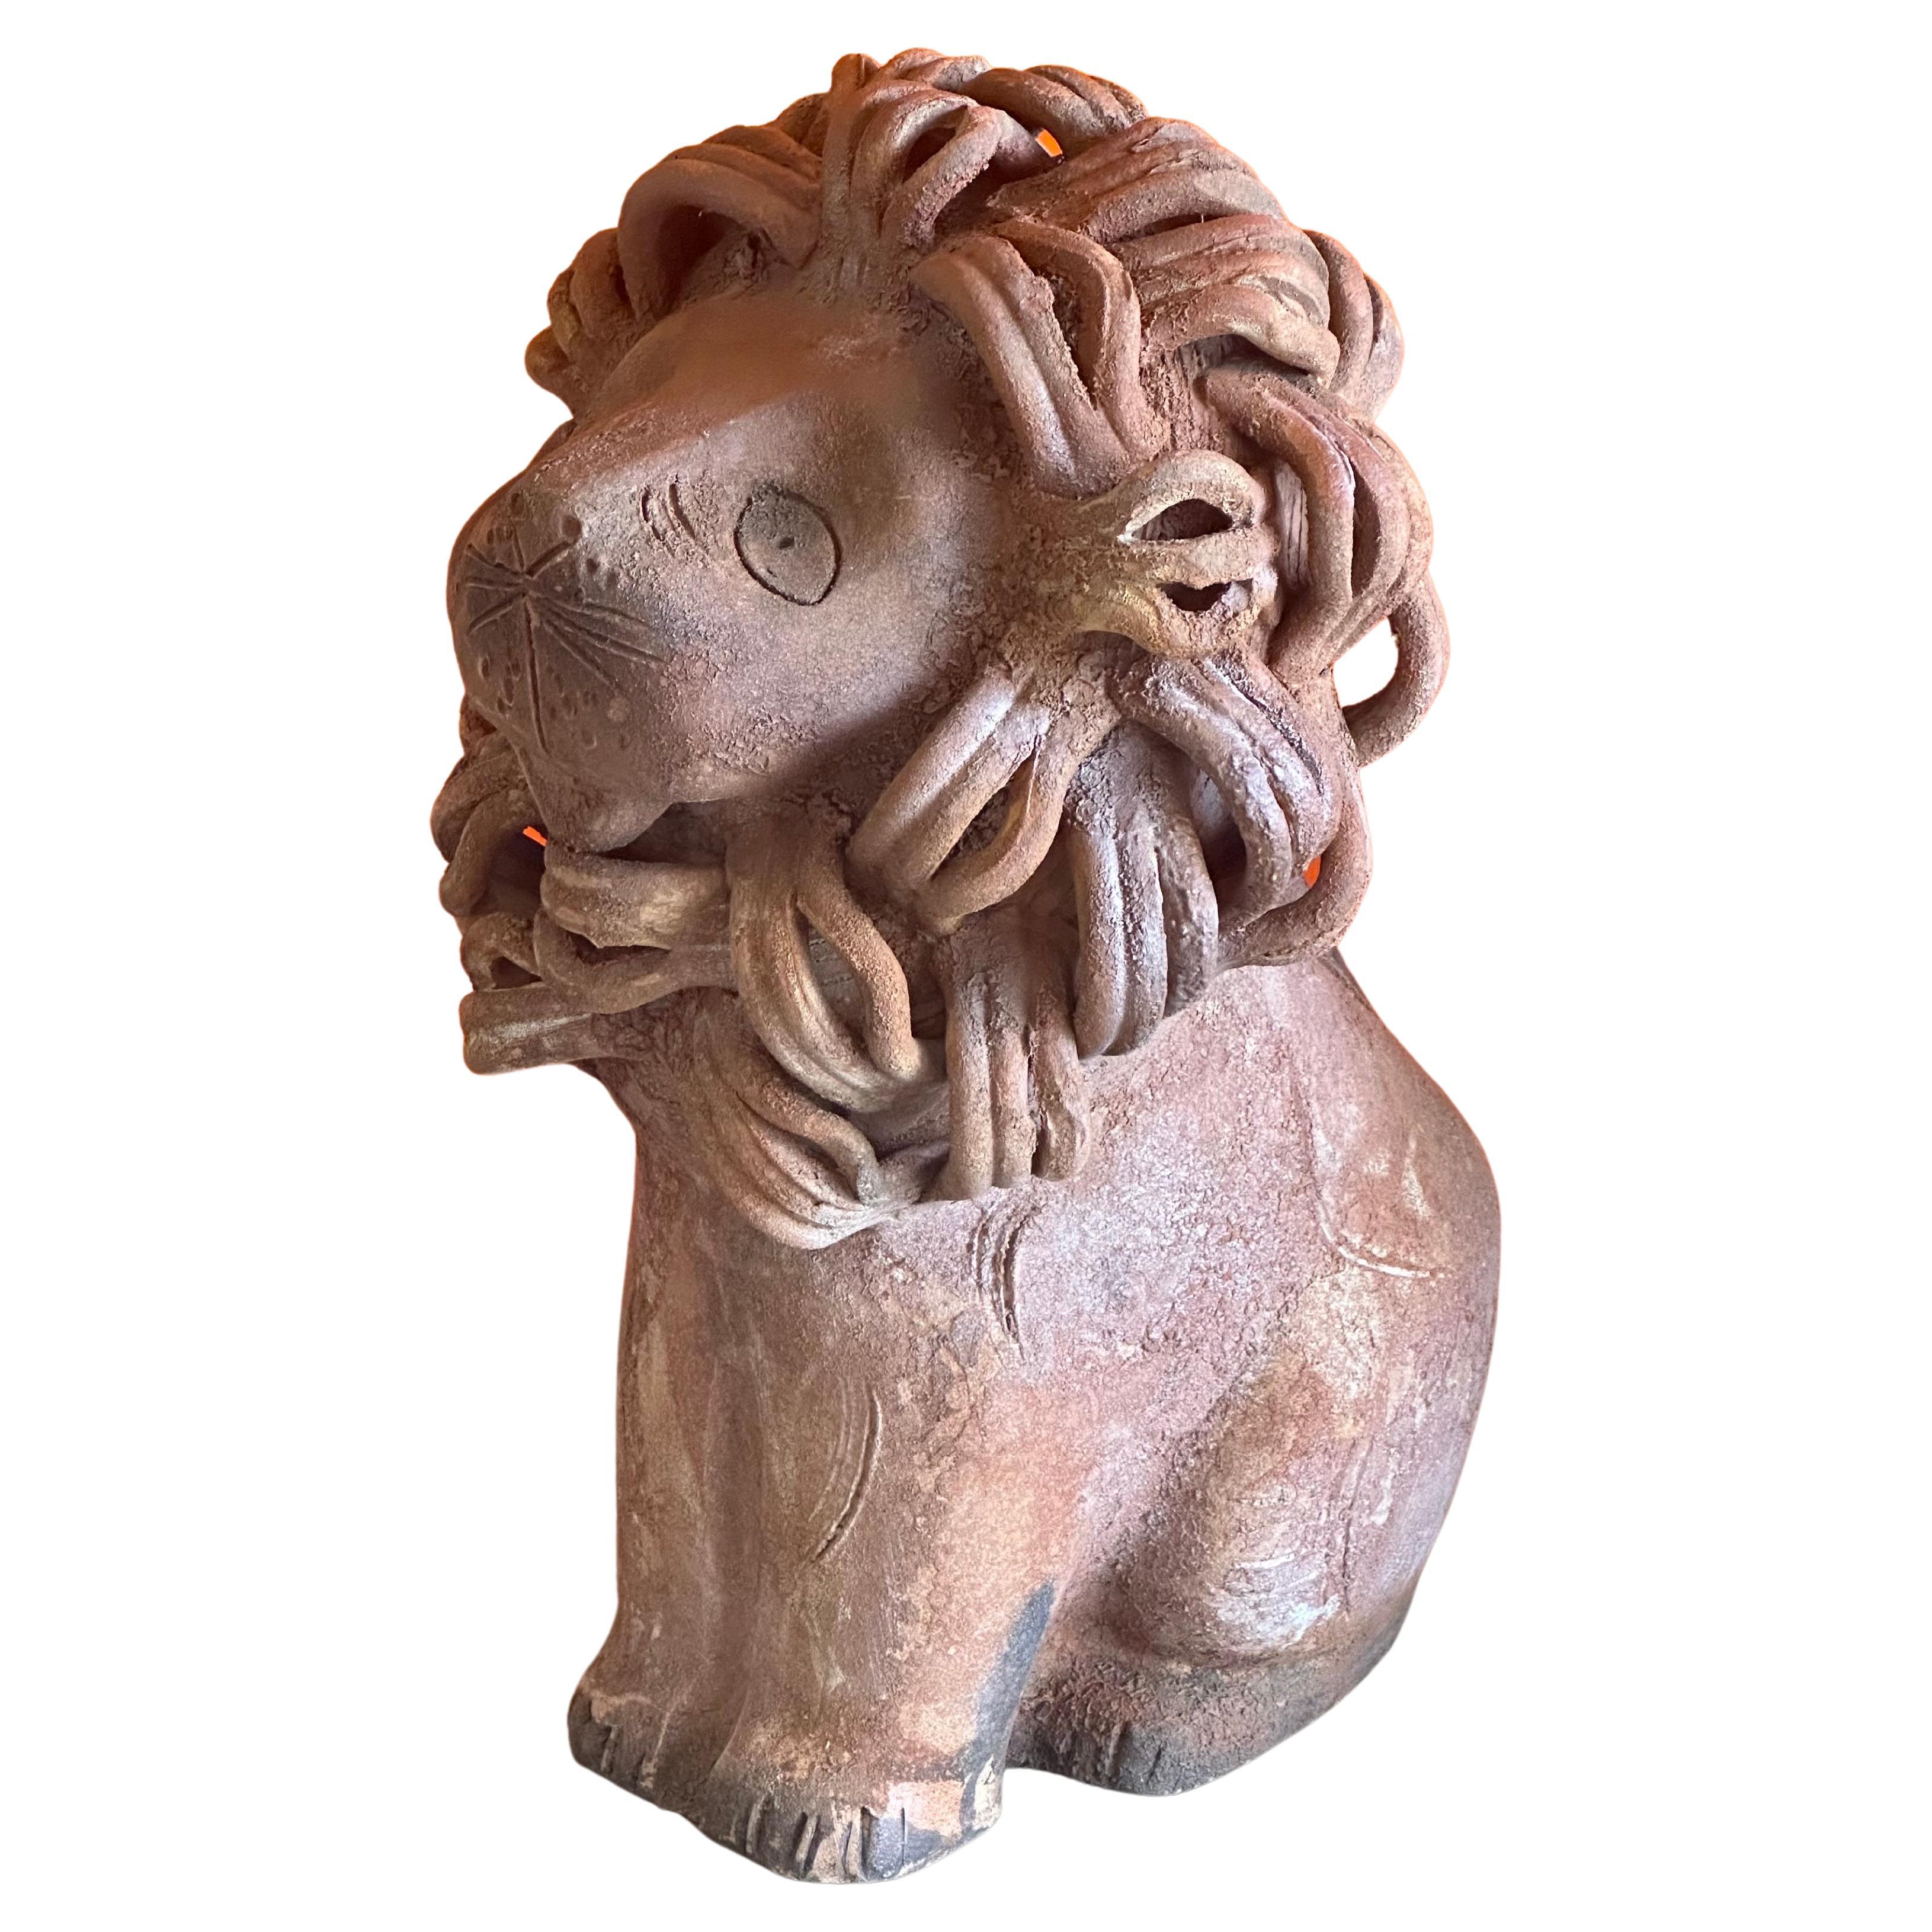 Mid-Century Modern Vintage Ceramiche / Pottery Lion Sculpture by Aldo Londo for Bitossi Raymor For Sale